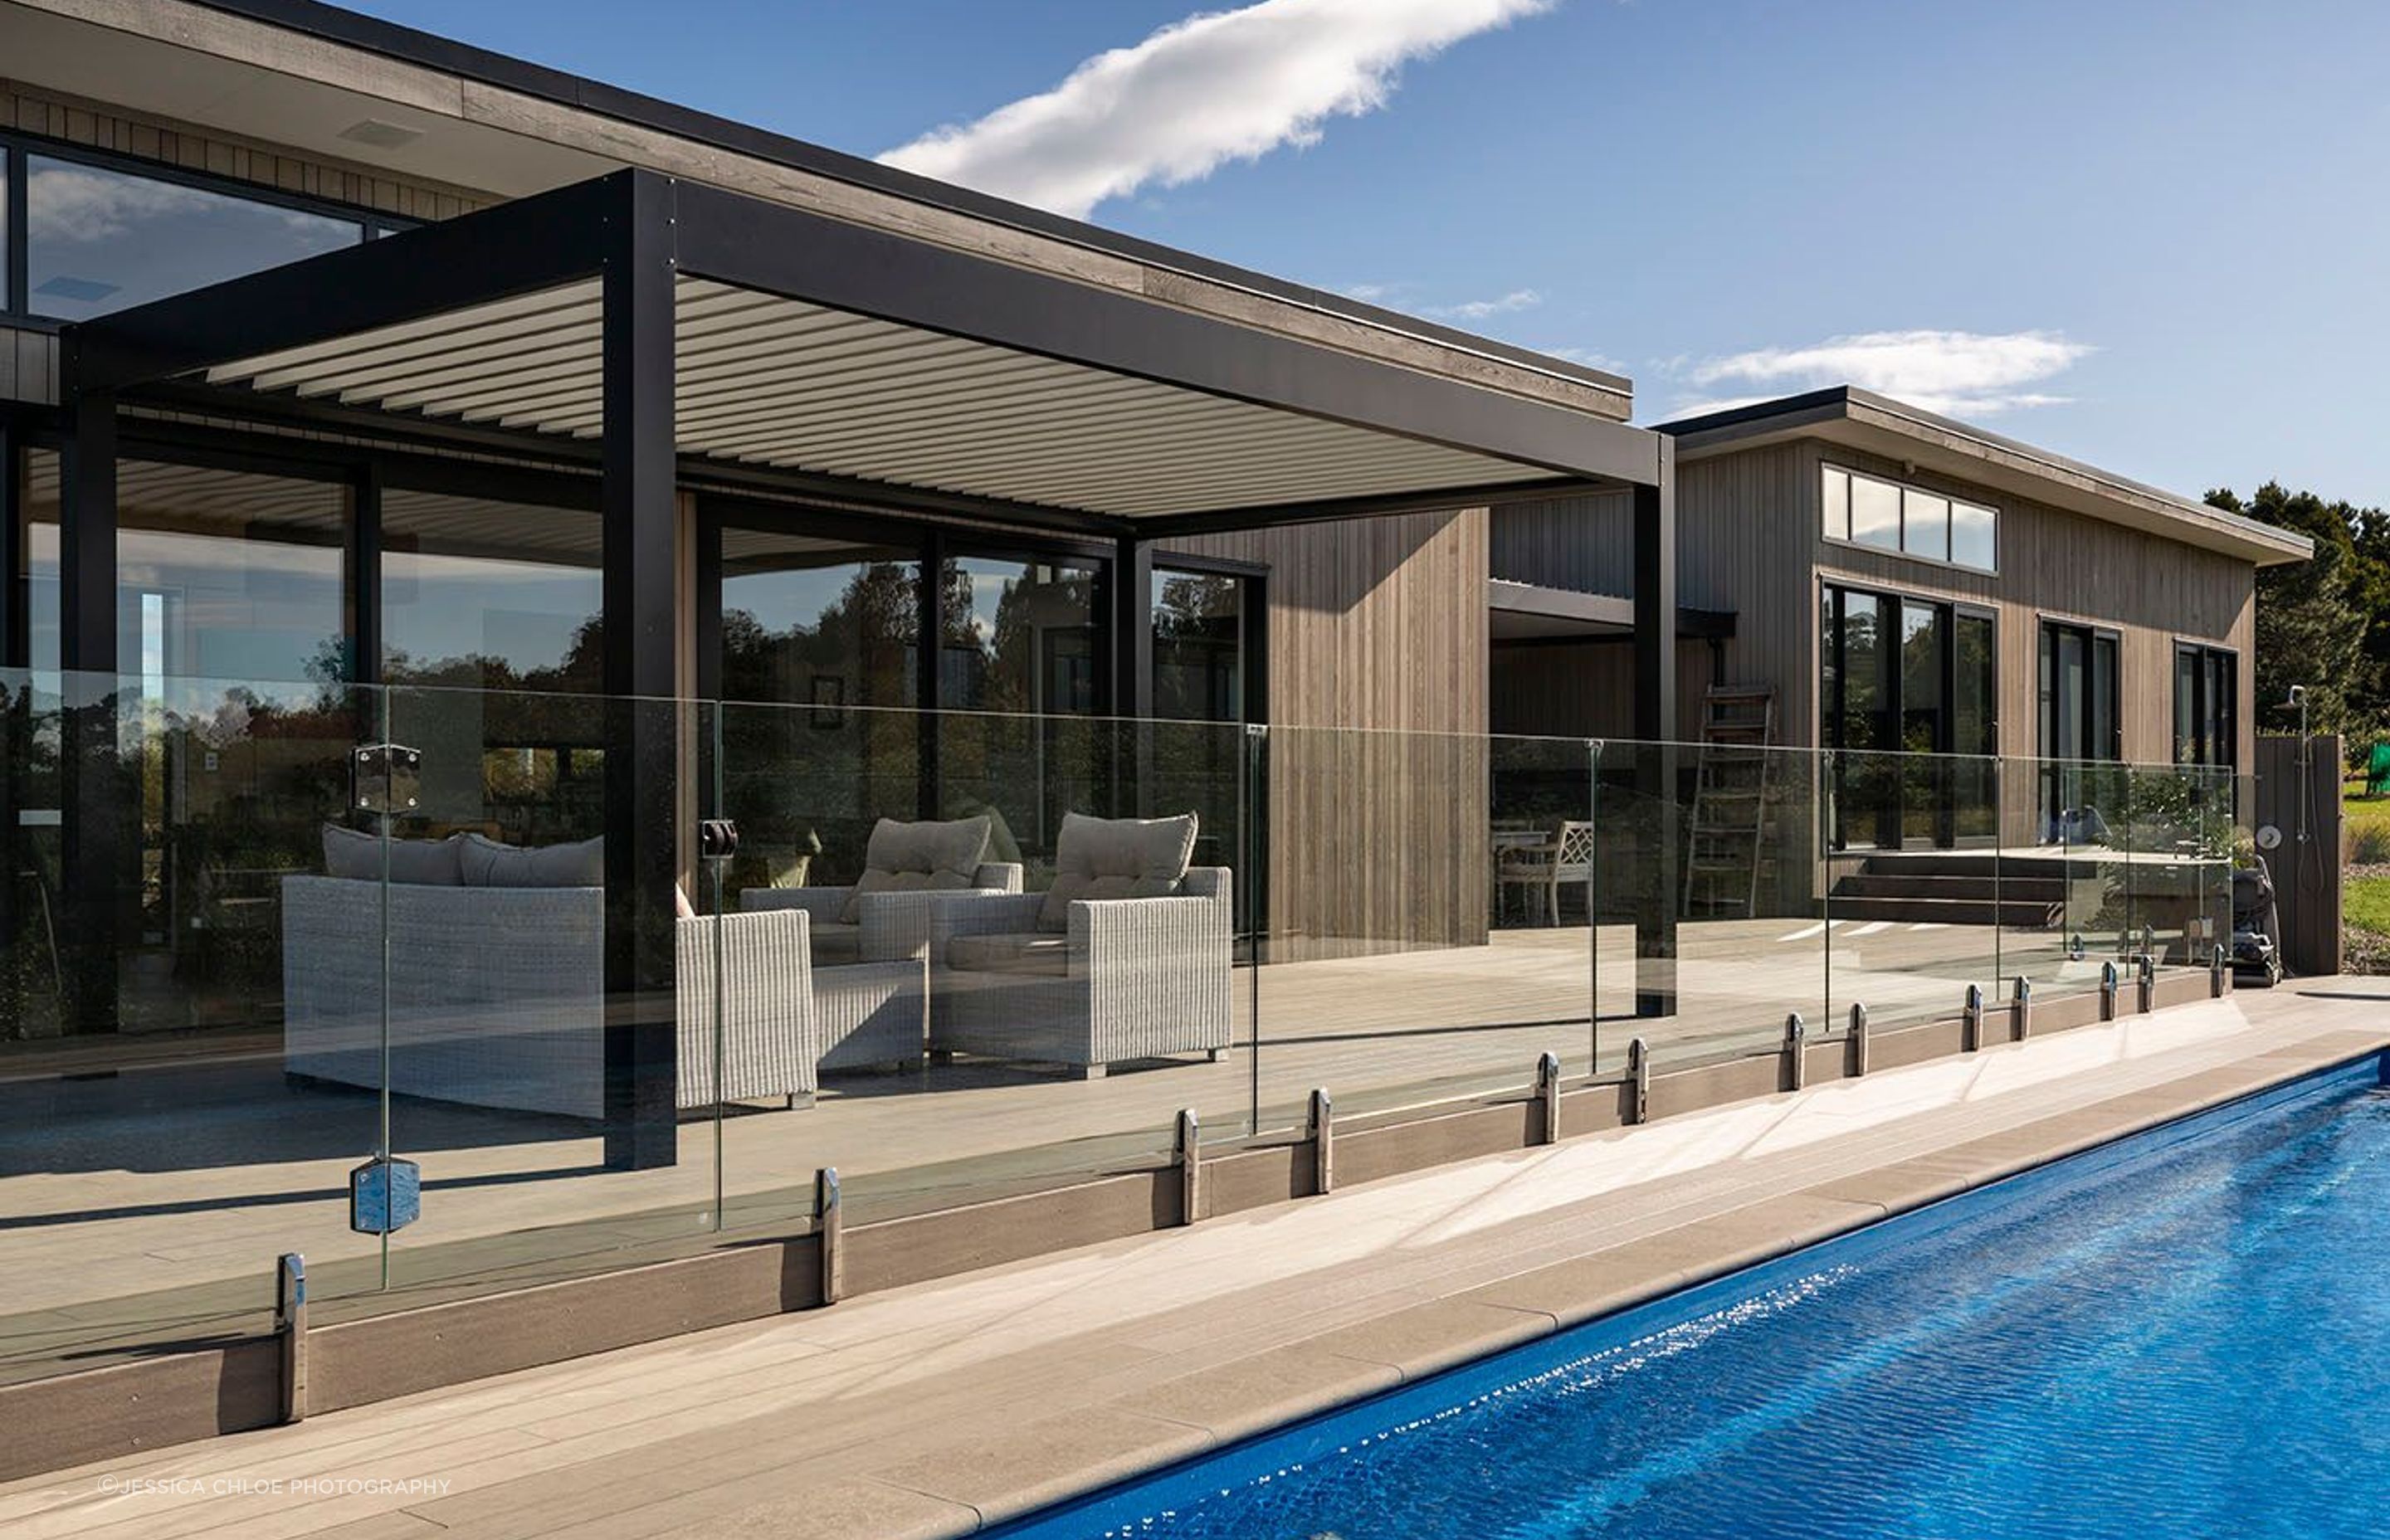 Generous composite decks lead out to the pool from the outdoor entertaining area.